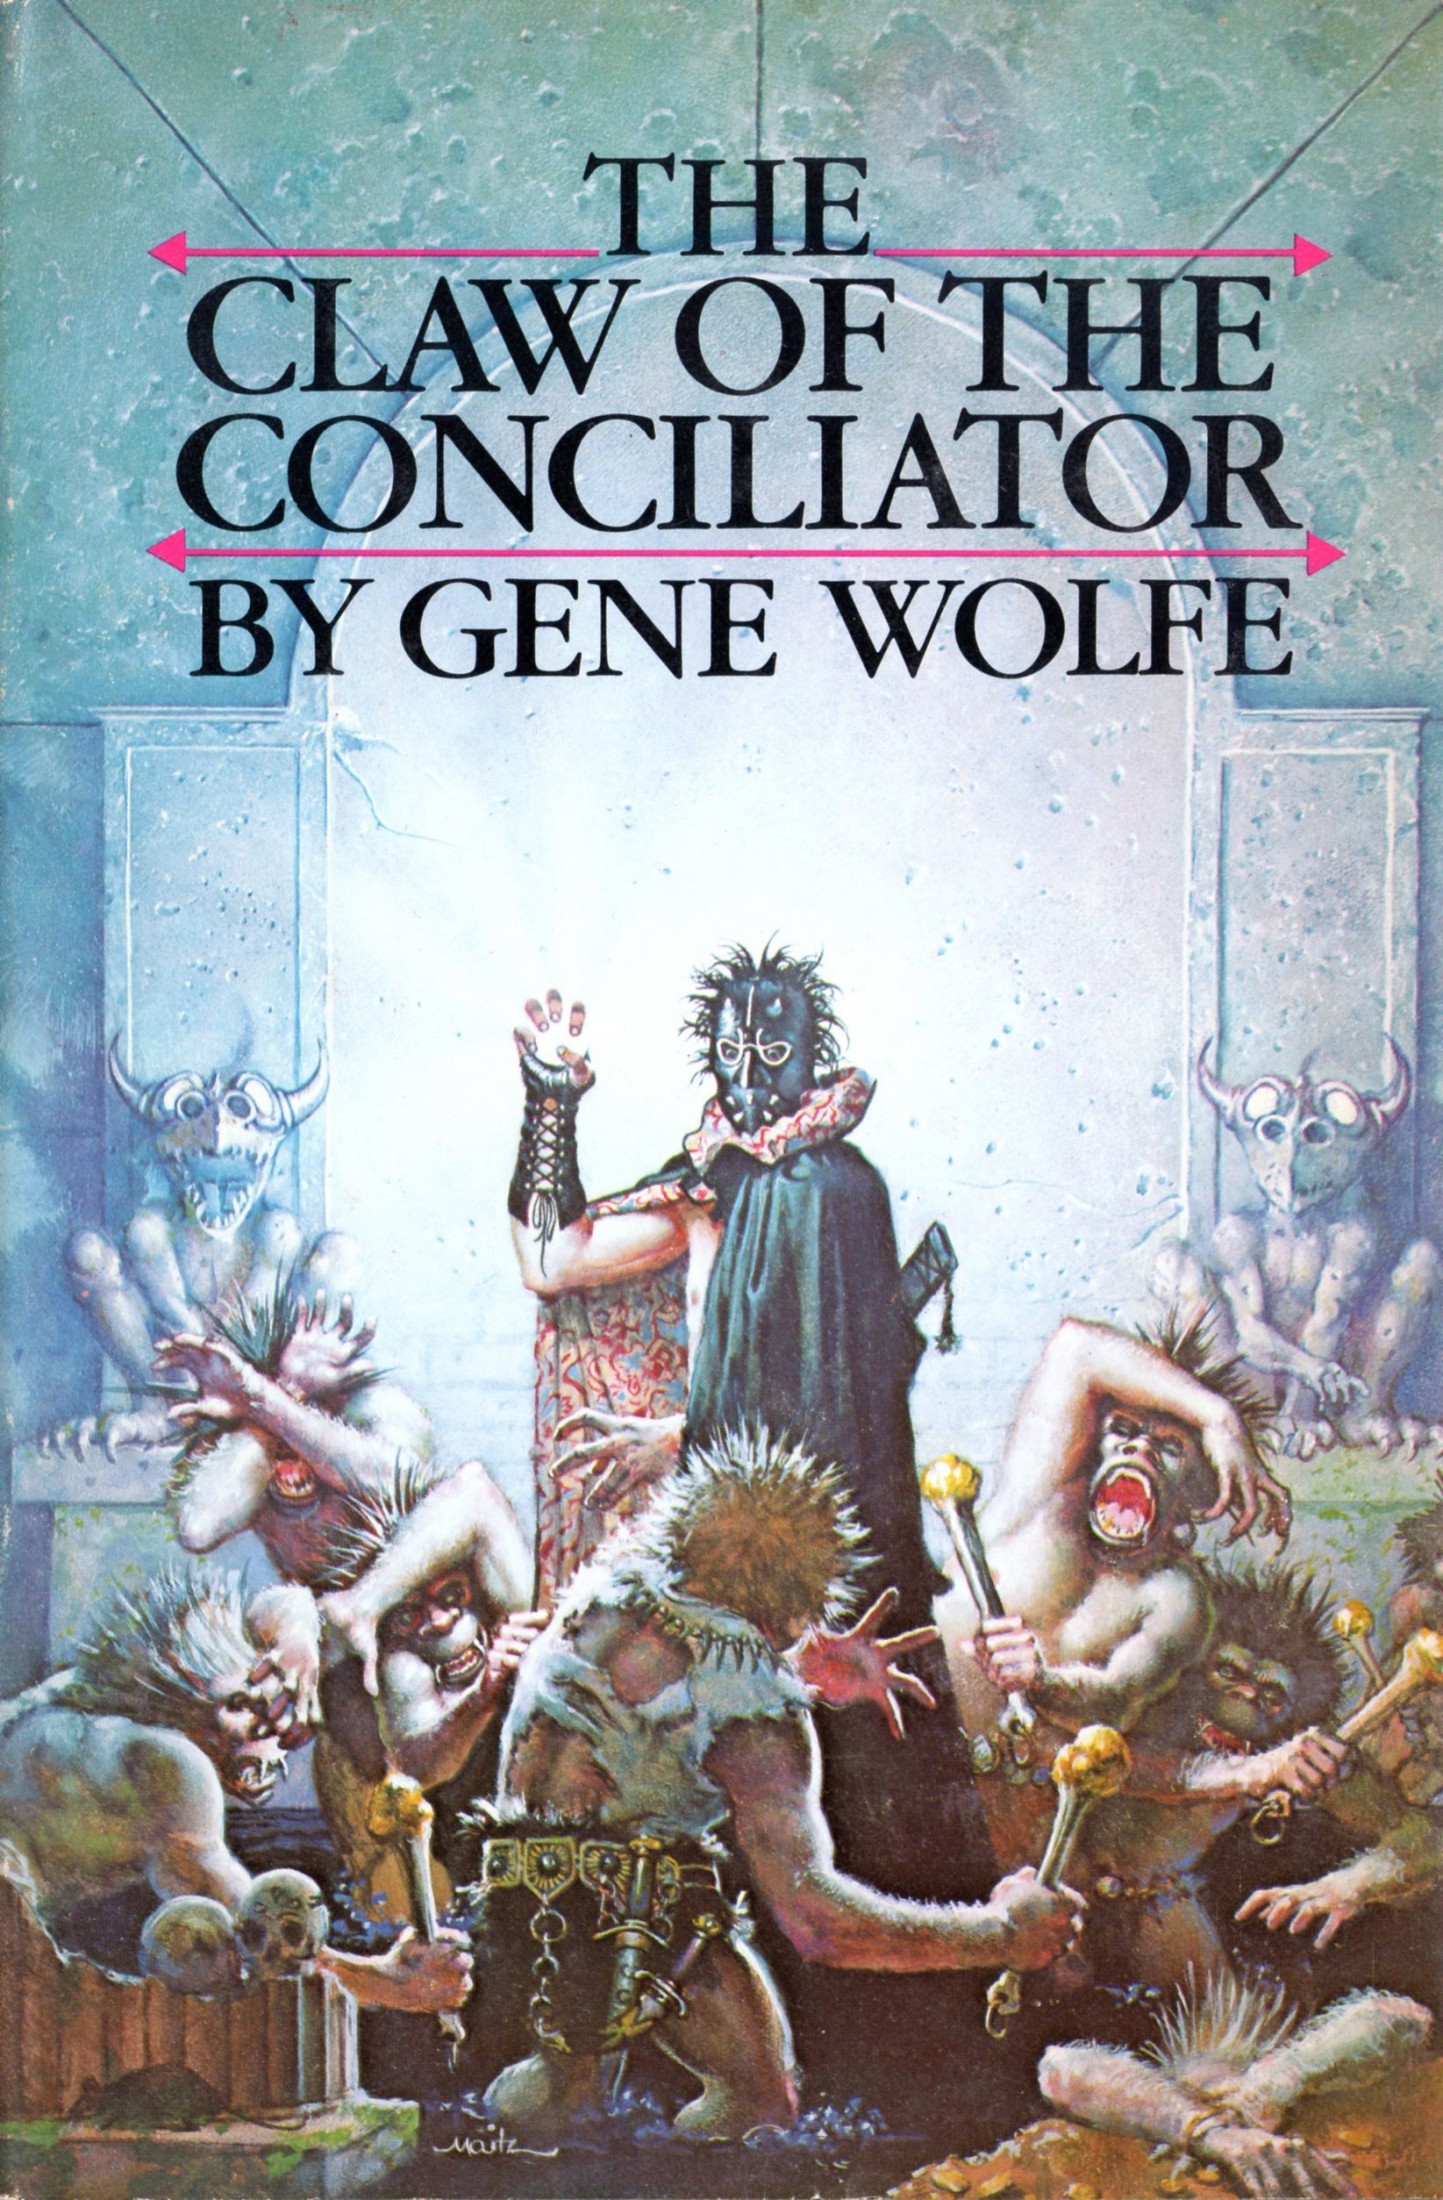 Book cover of The Claw of the Conciliator.